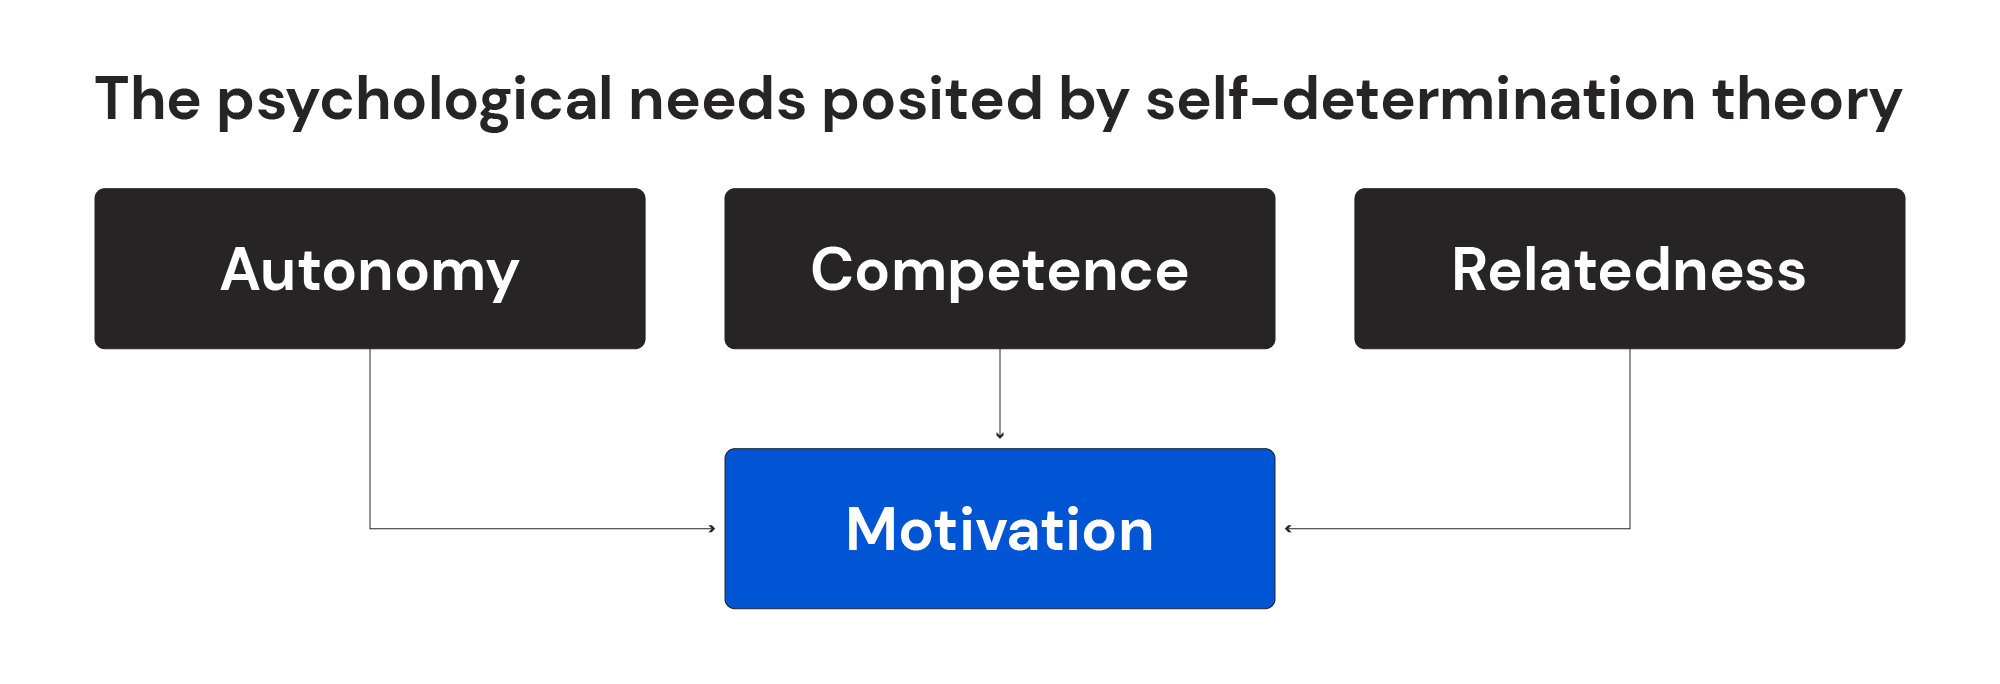 The psychological needs posited by self-determination theory